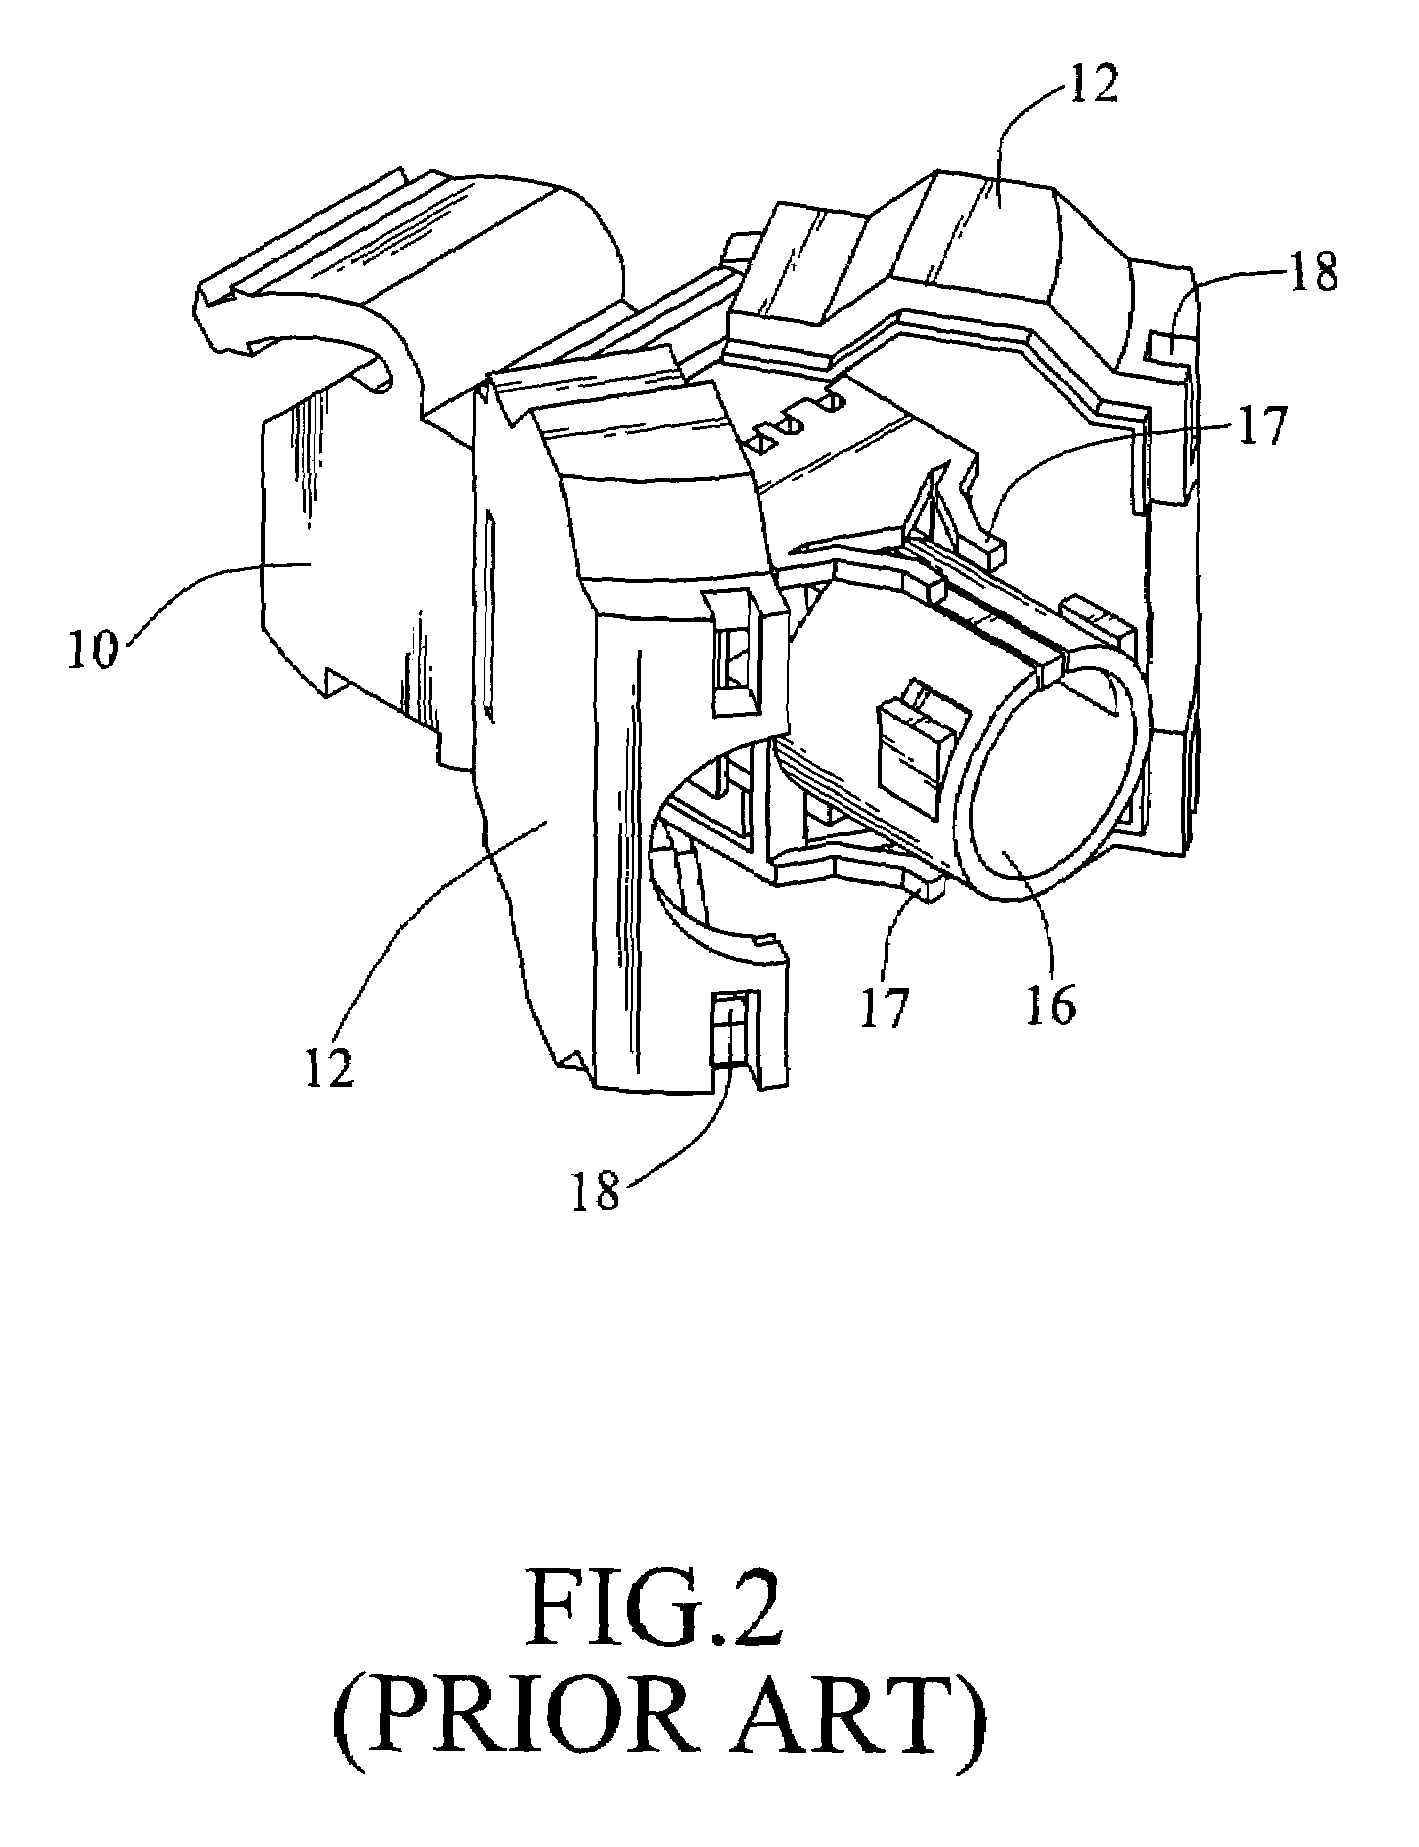 Socket with integrated insulation displacement connection terminals